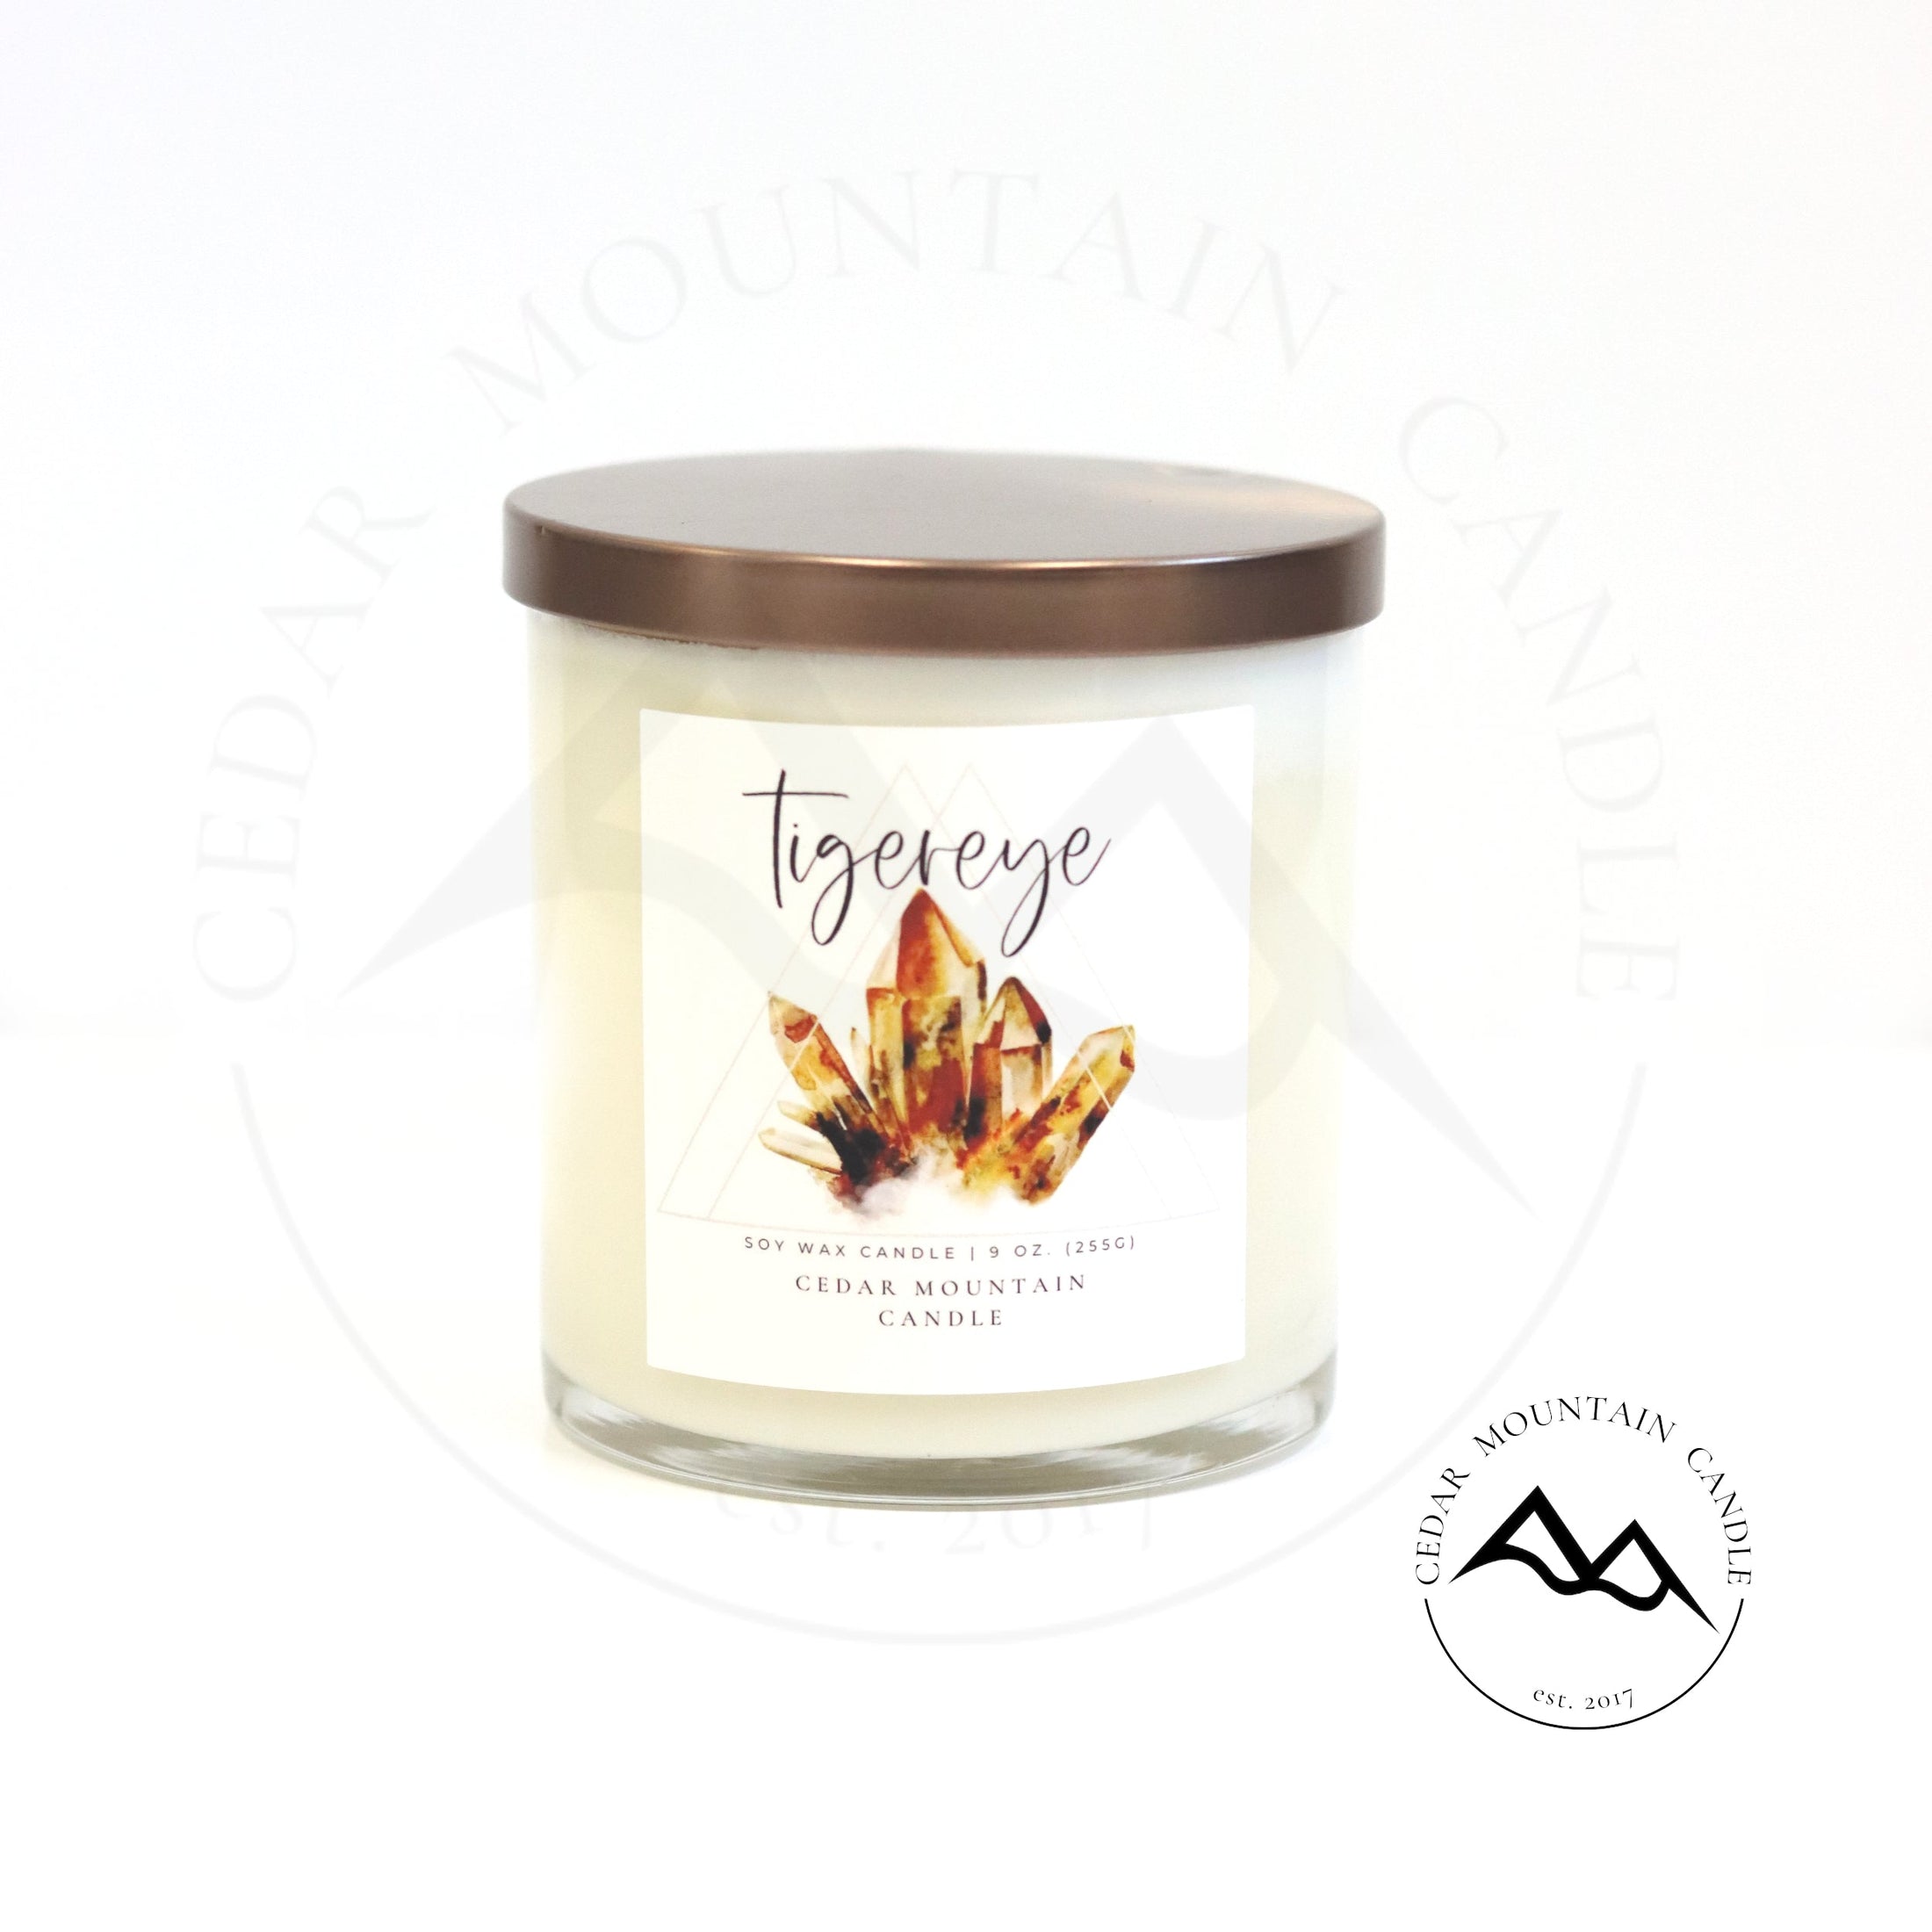 Tiger Eye - 9 oz Healing Crystals Soy Candle - Creativity & Confidence